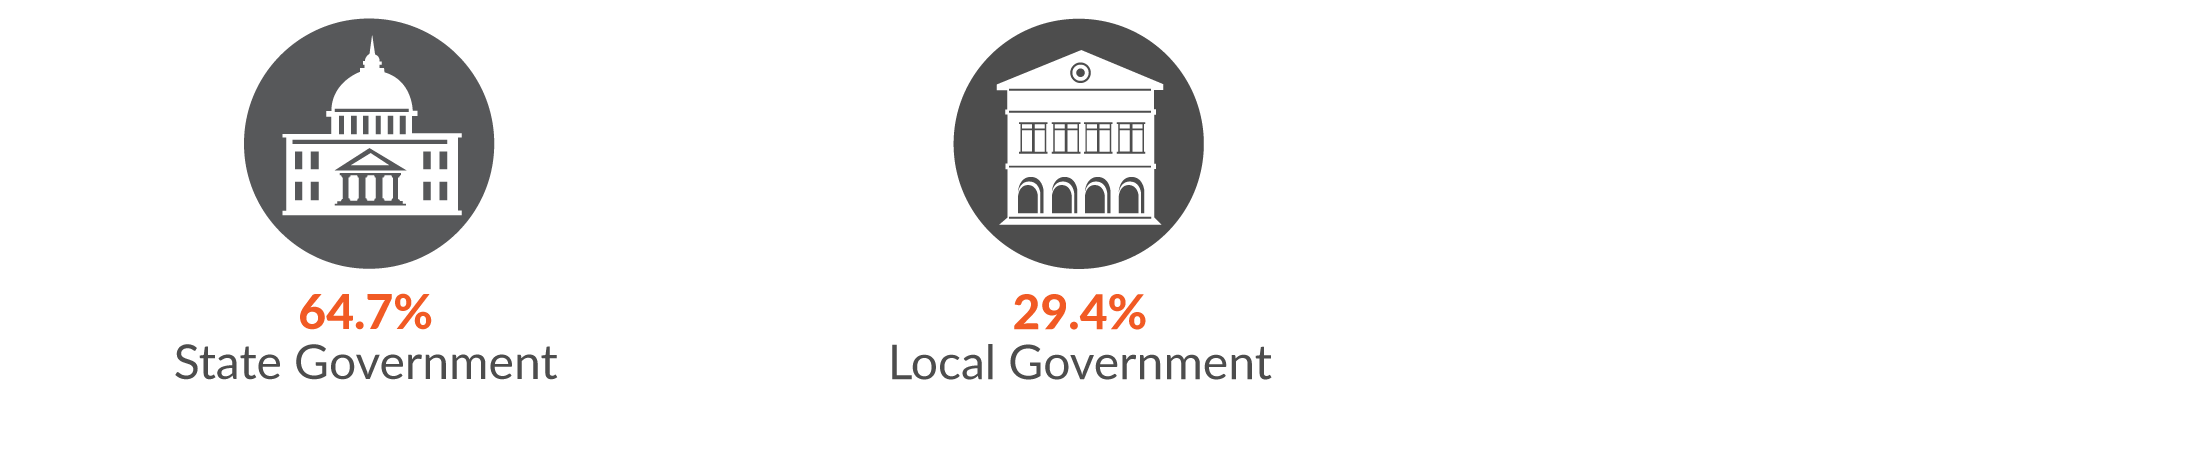 This infographic shows 64.7% of Government administration & defence serious injury claims were in State Government and 29.4% in Local Government.